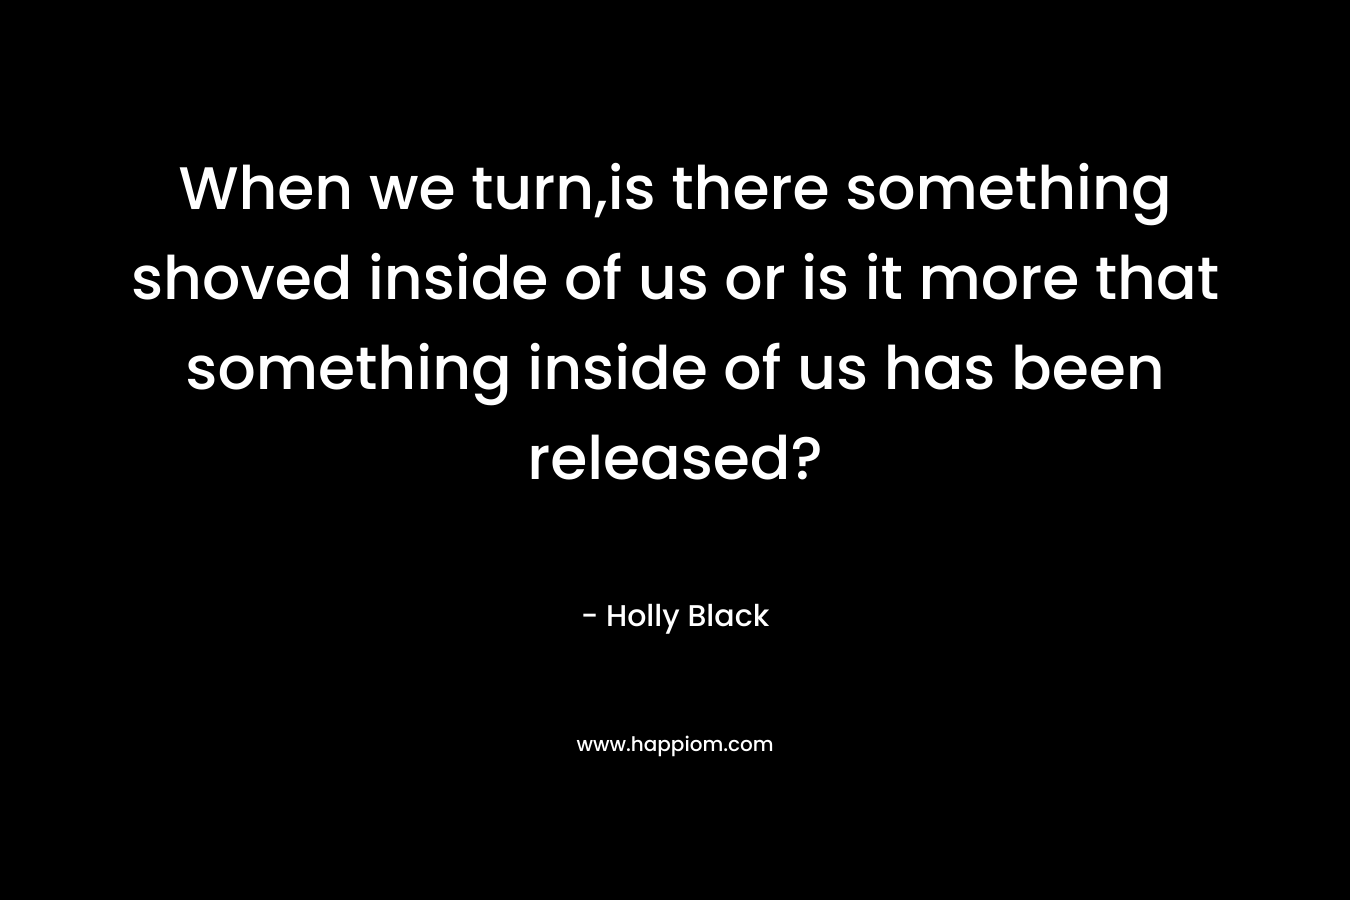 When we turn,is there something shoved inside of us or is it more that something inside of us has been released? – Holly Black